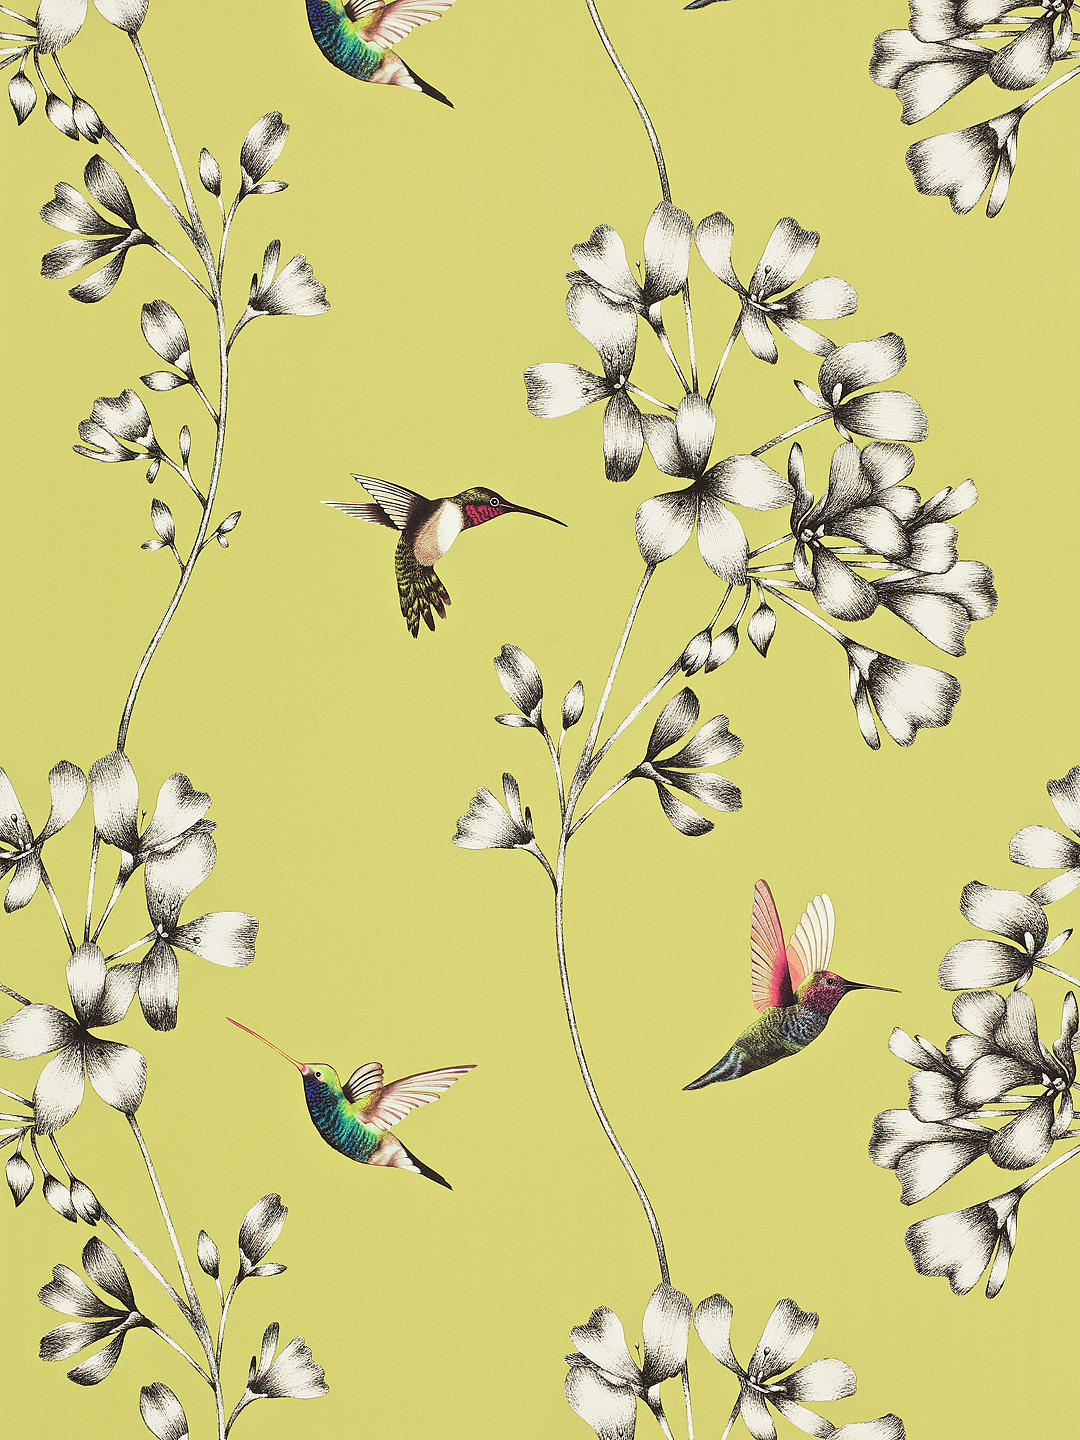 10 of the most stunning bird themed wallpapers - Envy Interior Design